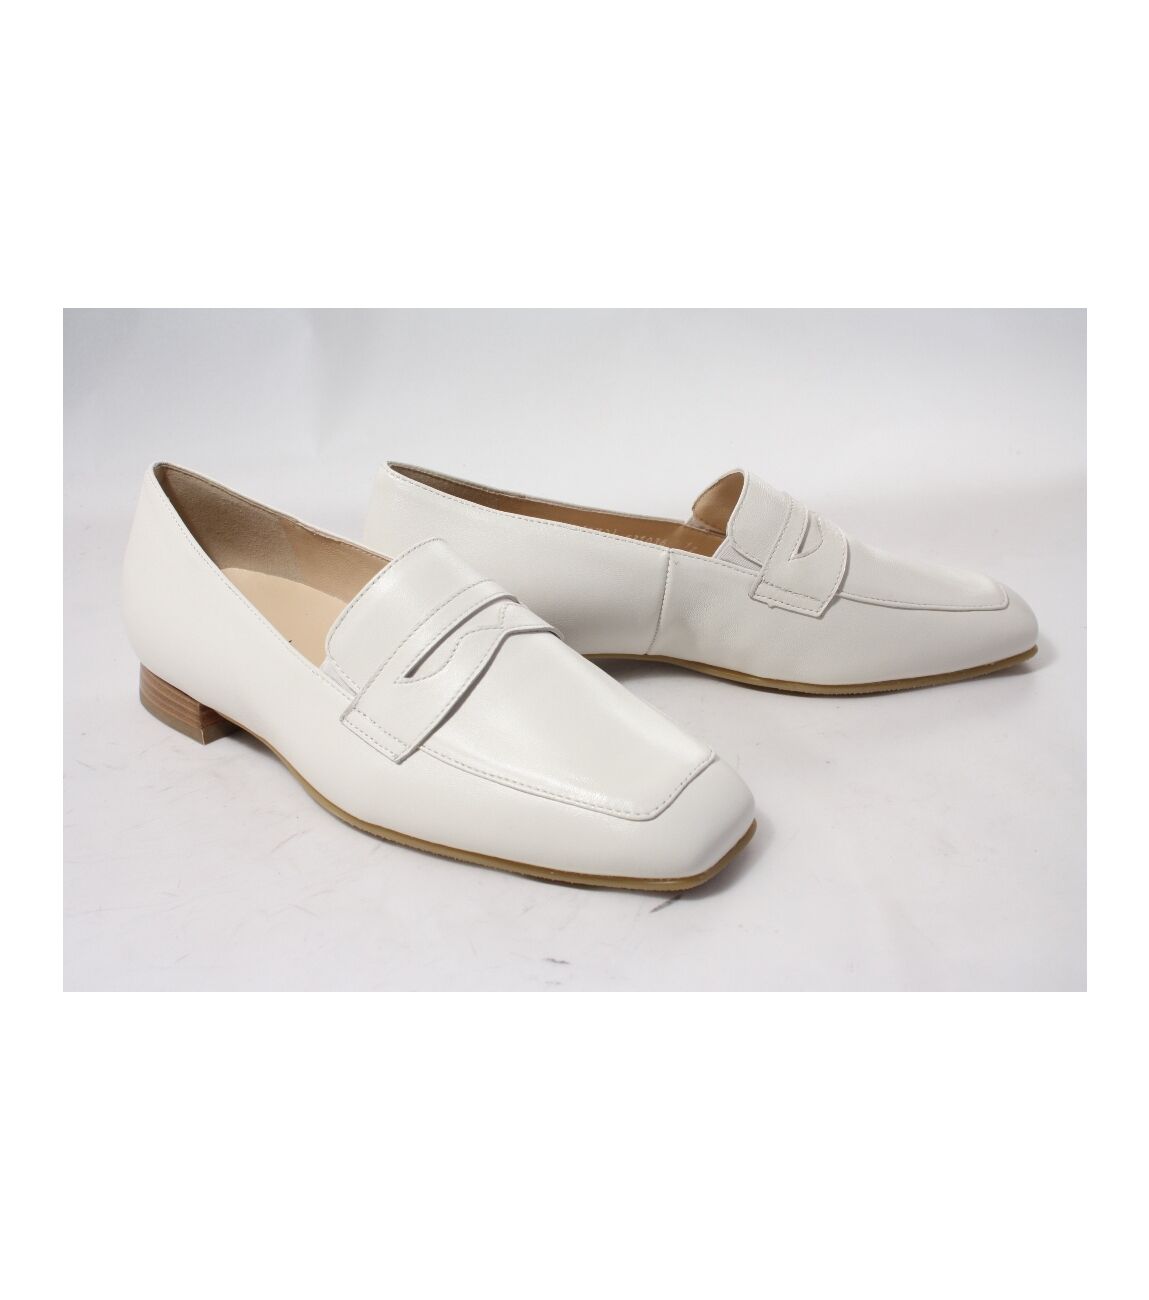 Hassia Napoli Loafers - Instappers - Dames - Wit - Maat 40